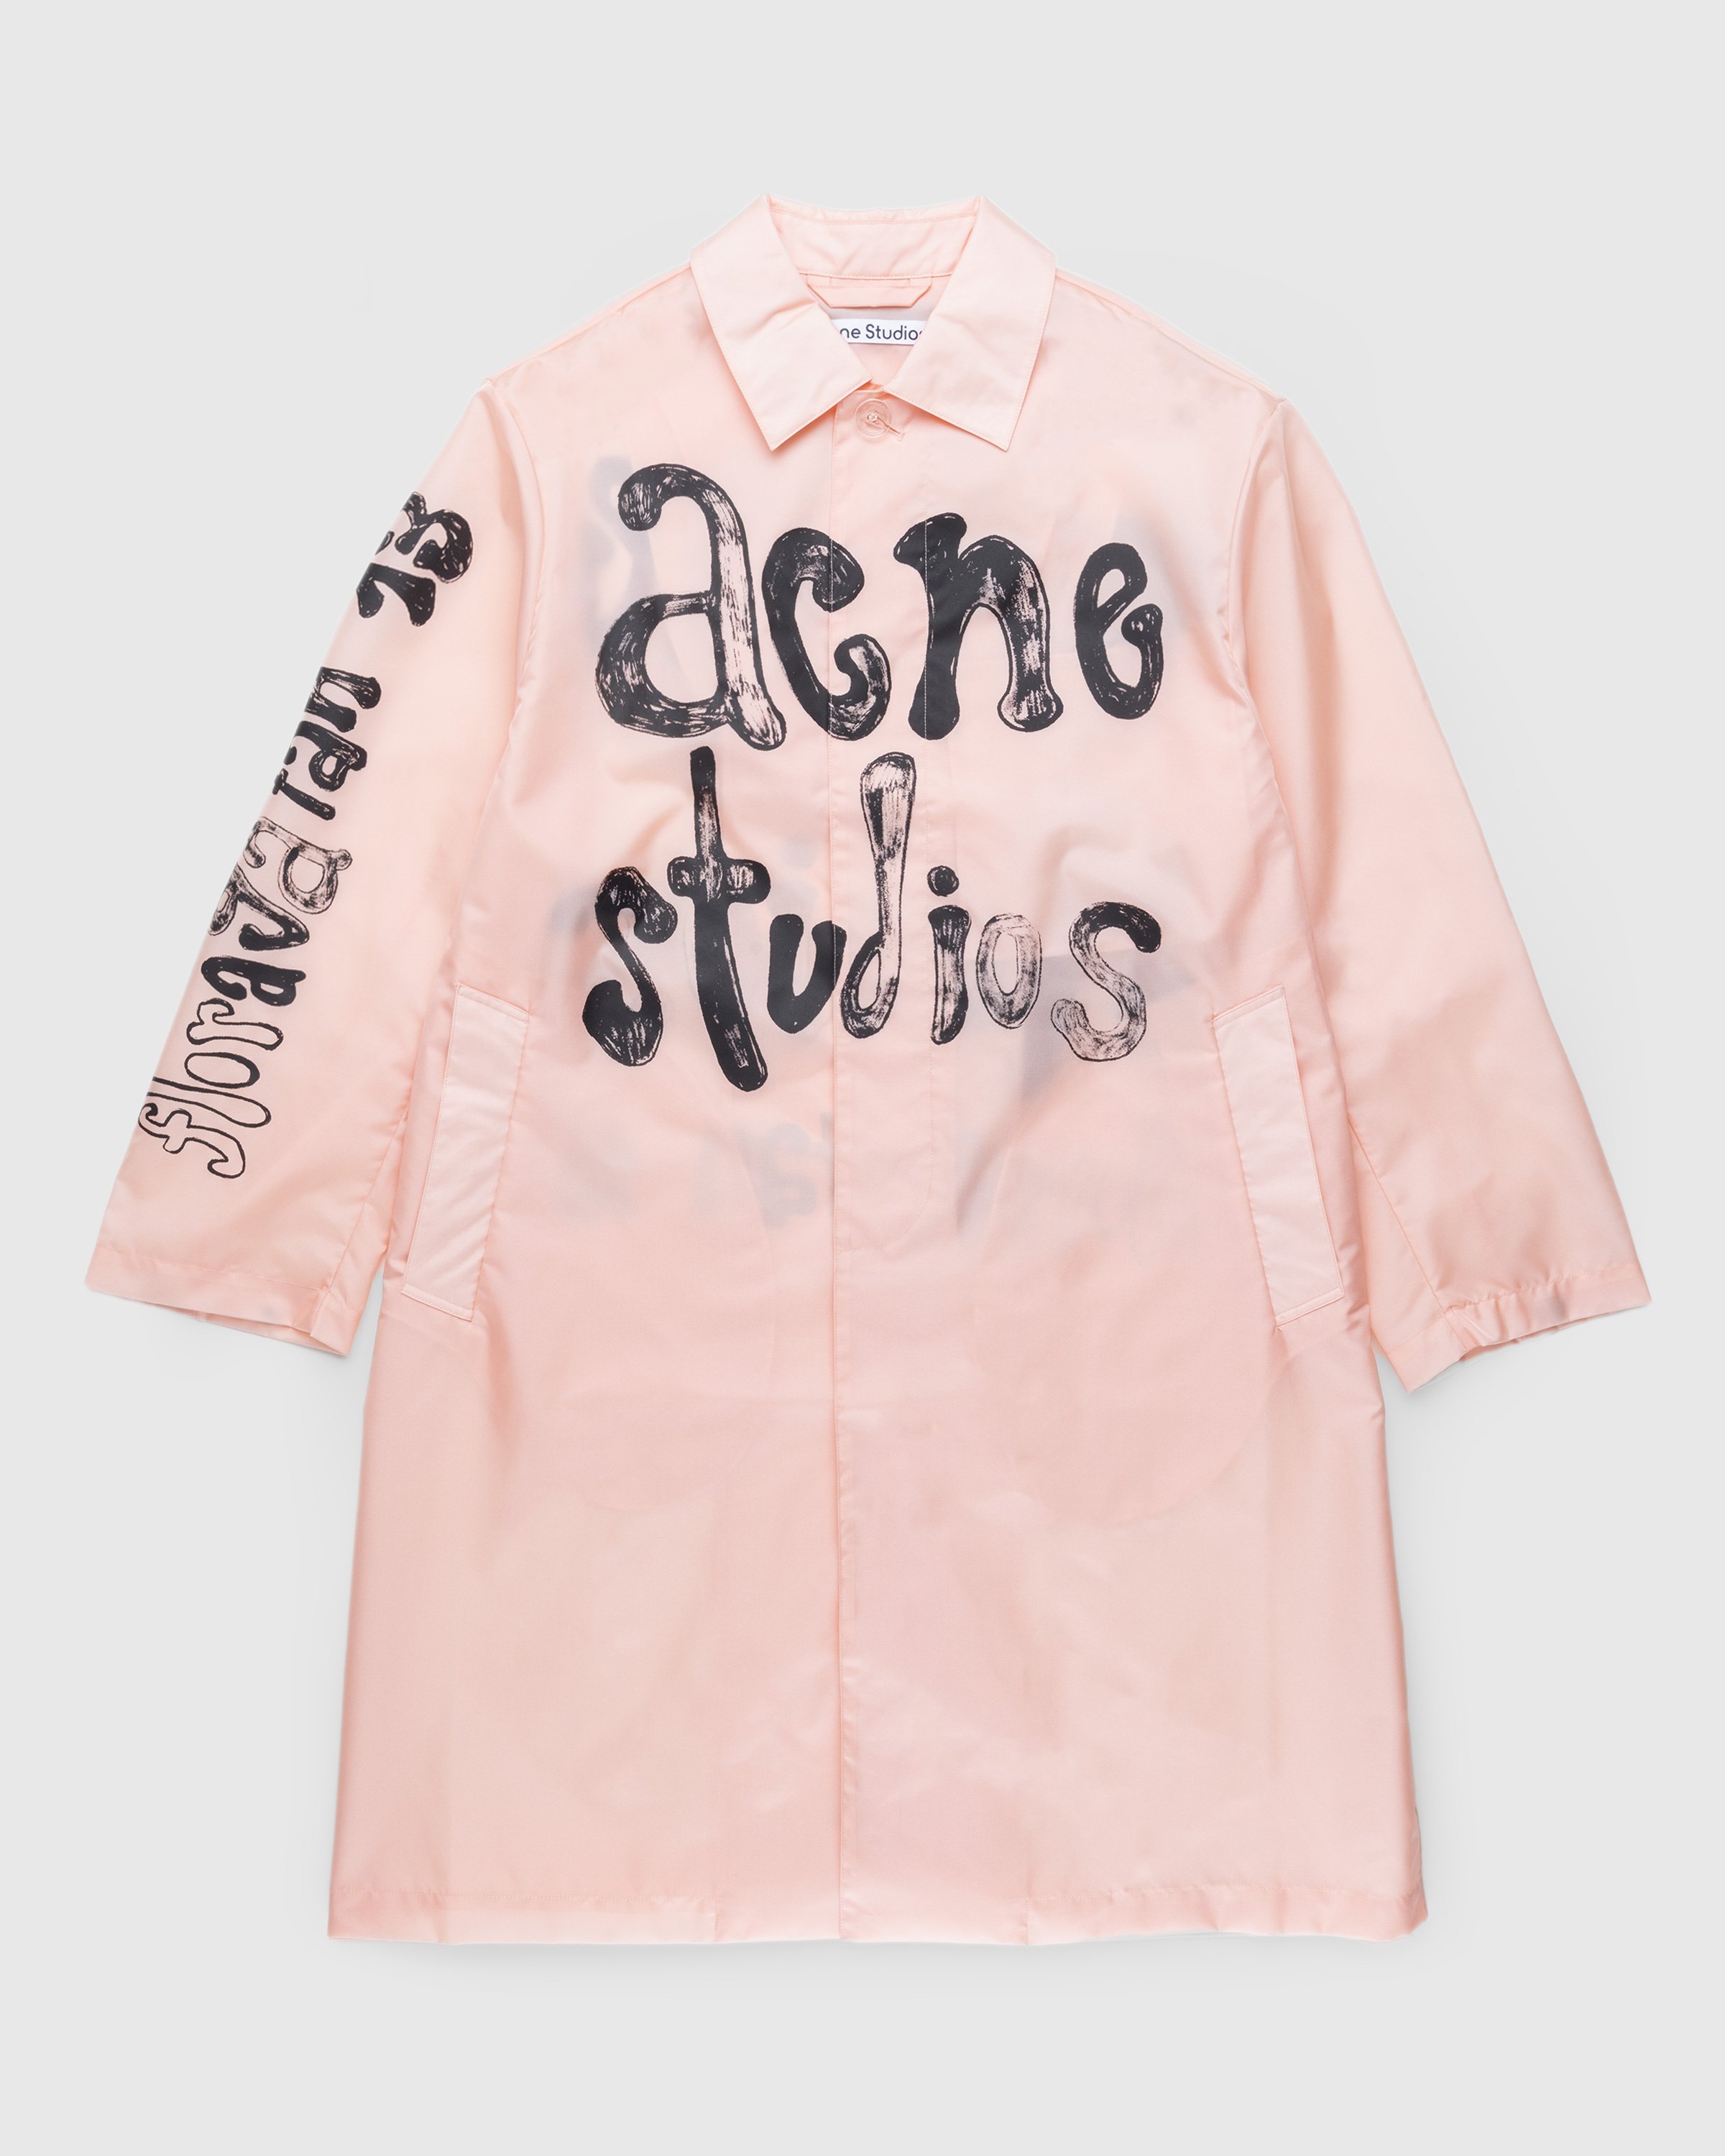 Acne Studios - Packable Trench Coat Pink - Clothing - Pink - Image 1